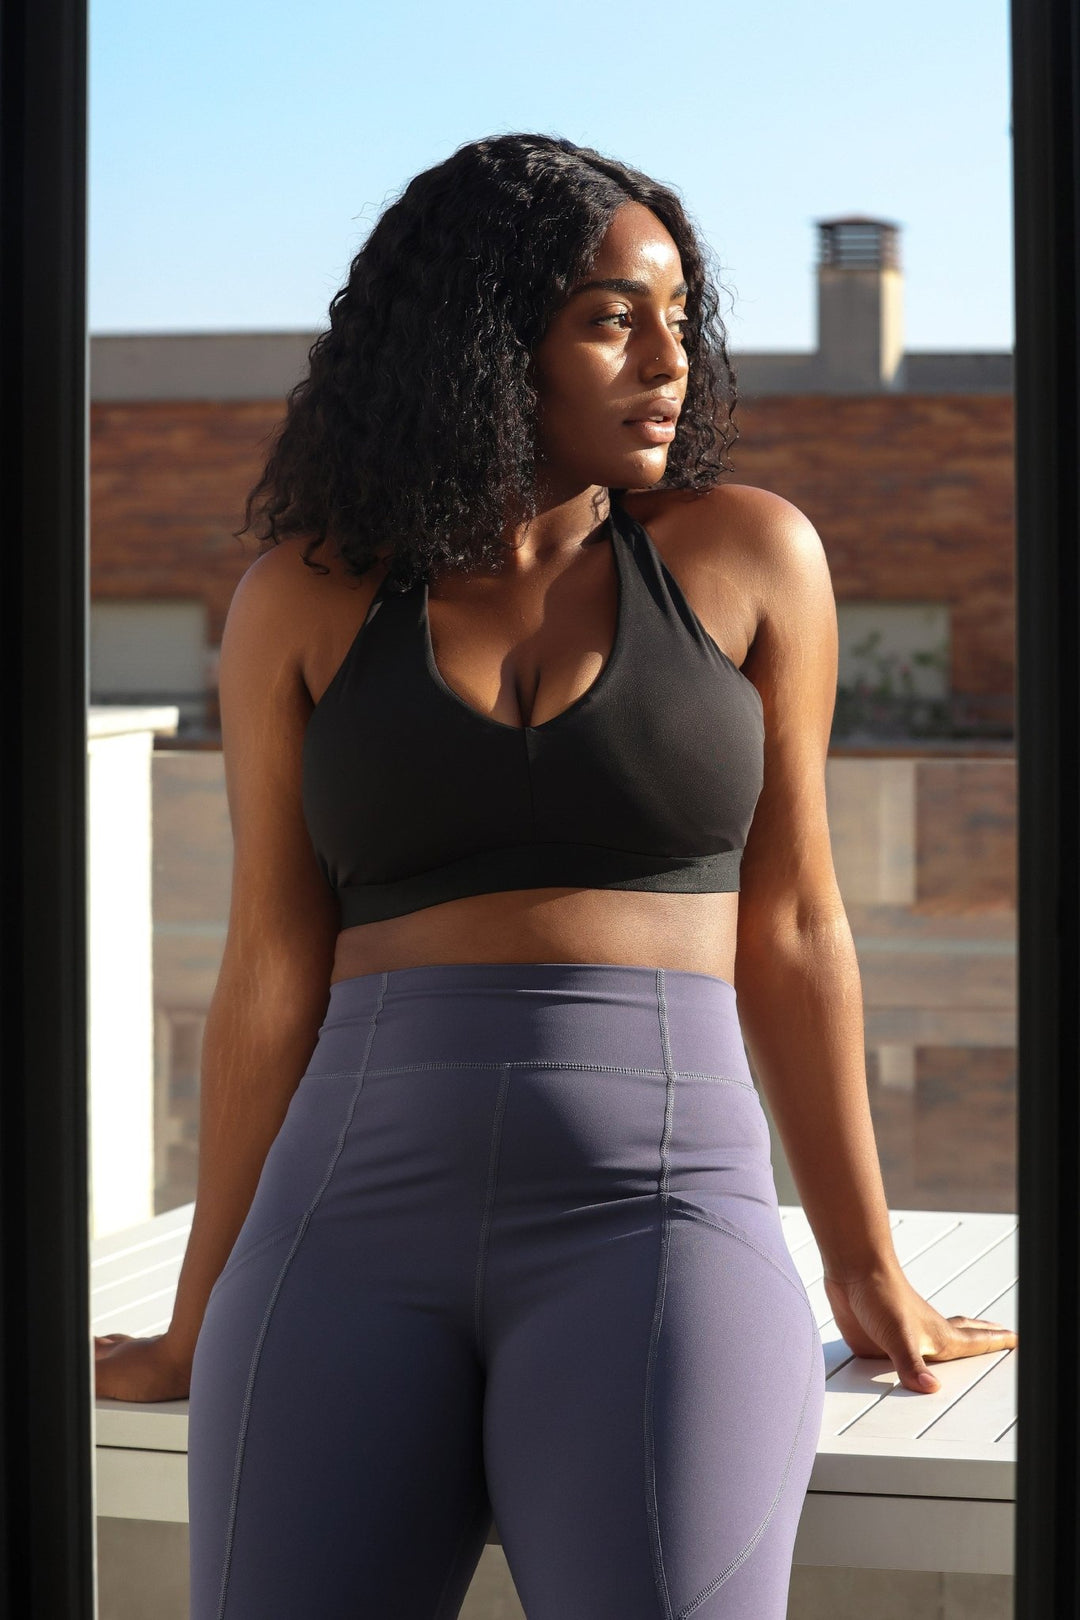 Cotton On activewear strappy sports bra in leopard